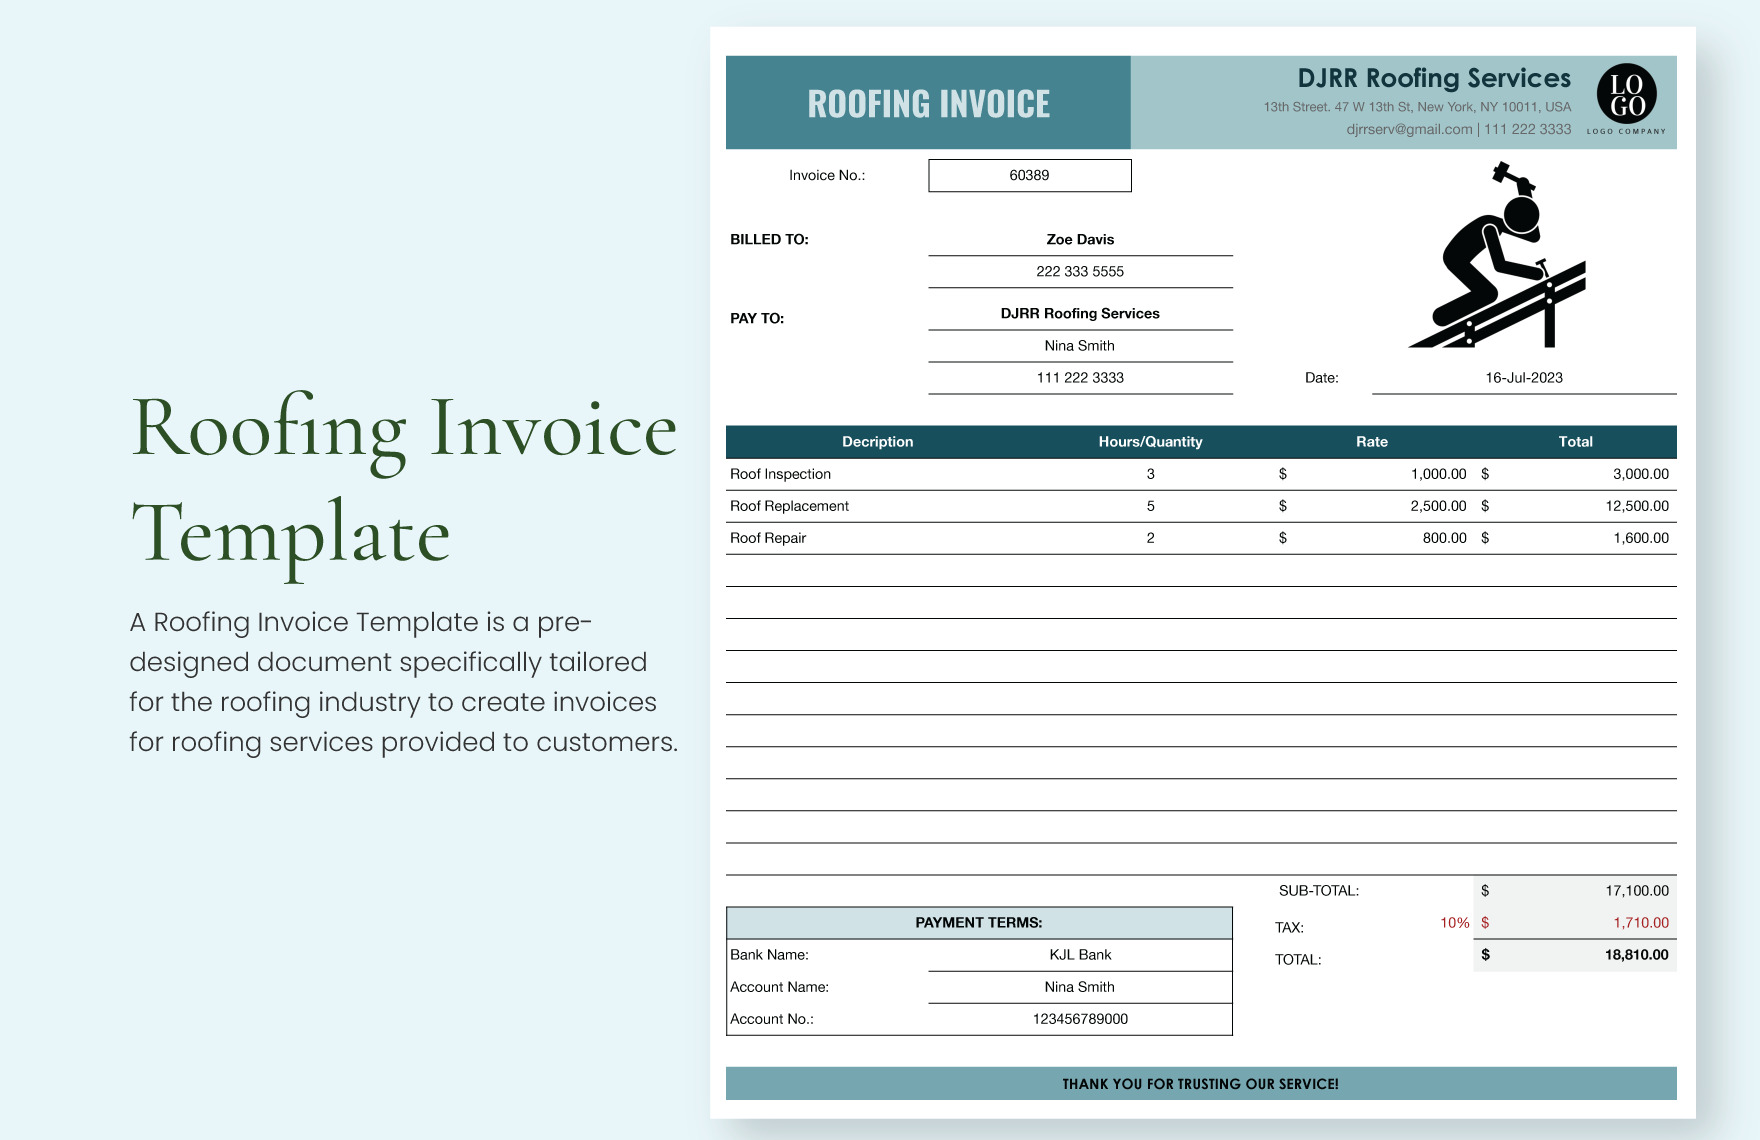 Roofing Invoice Template Download in Word, Google Docs, Excel, Google